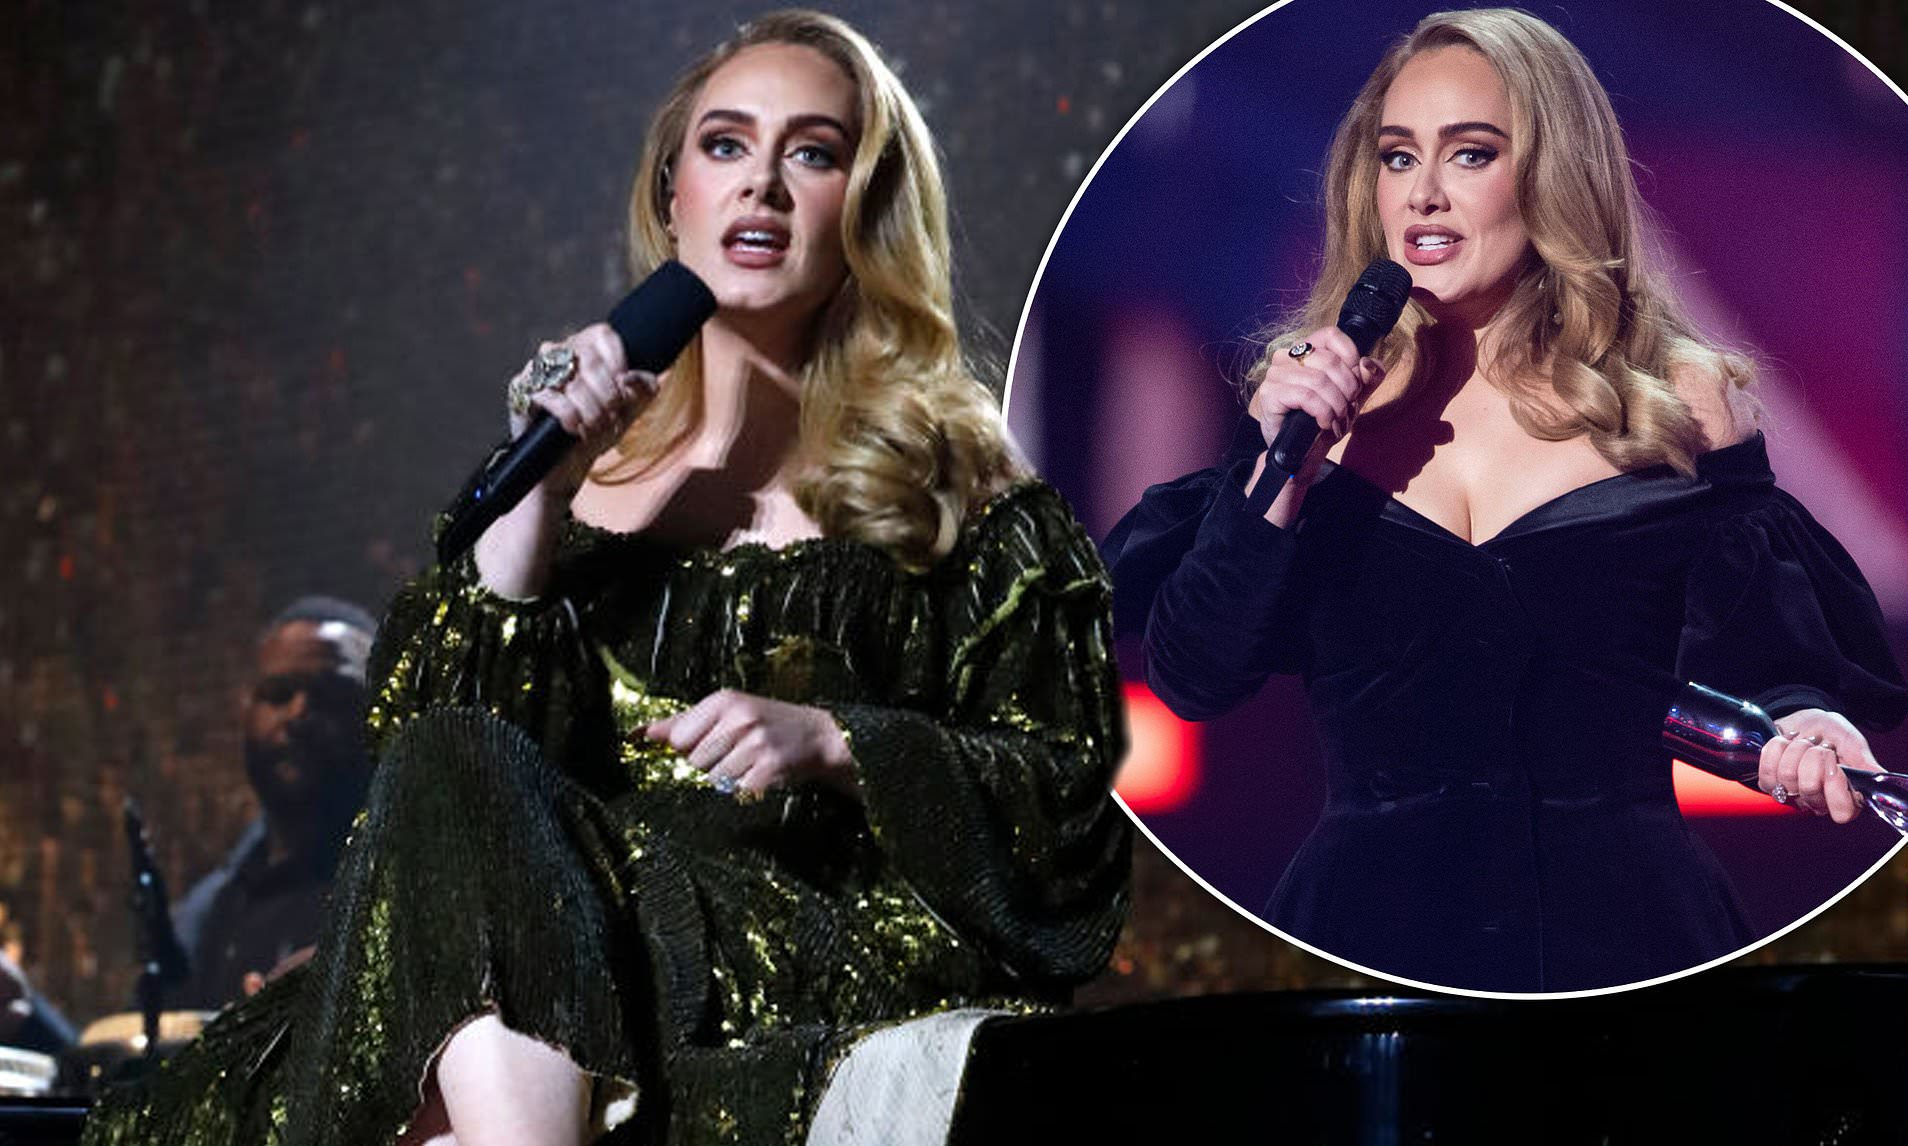 Adele shares excitement for upcoming Hyde Park gig but fans rage about delayed Las Vegas residency